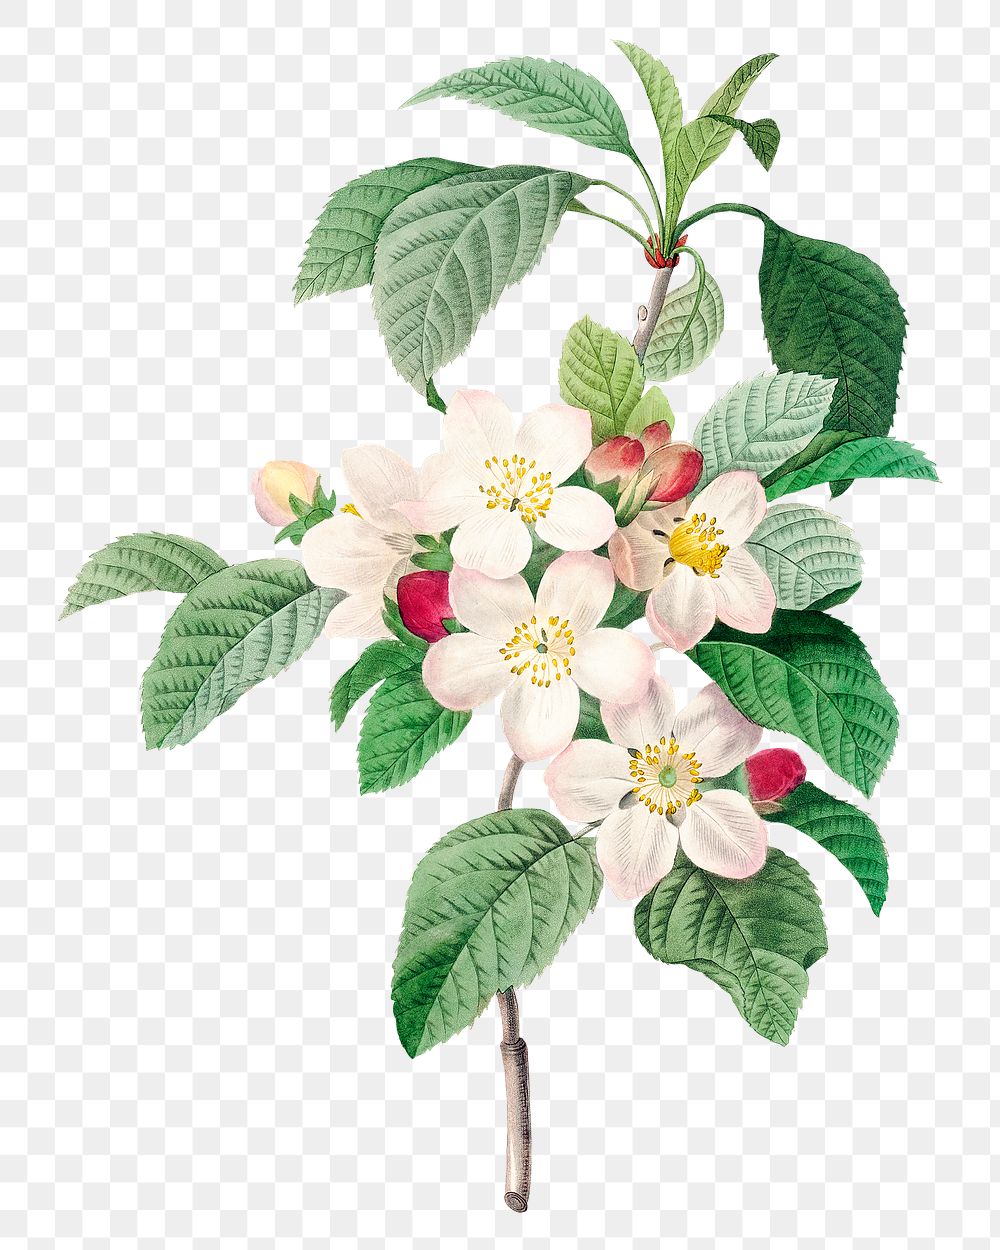 Crab apple flower png botanical illustration, remixed from artworks by Pierre-Joseph Redout&eacute;